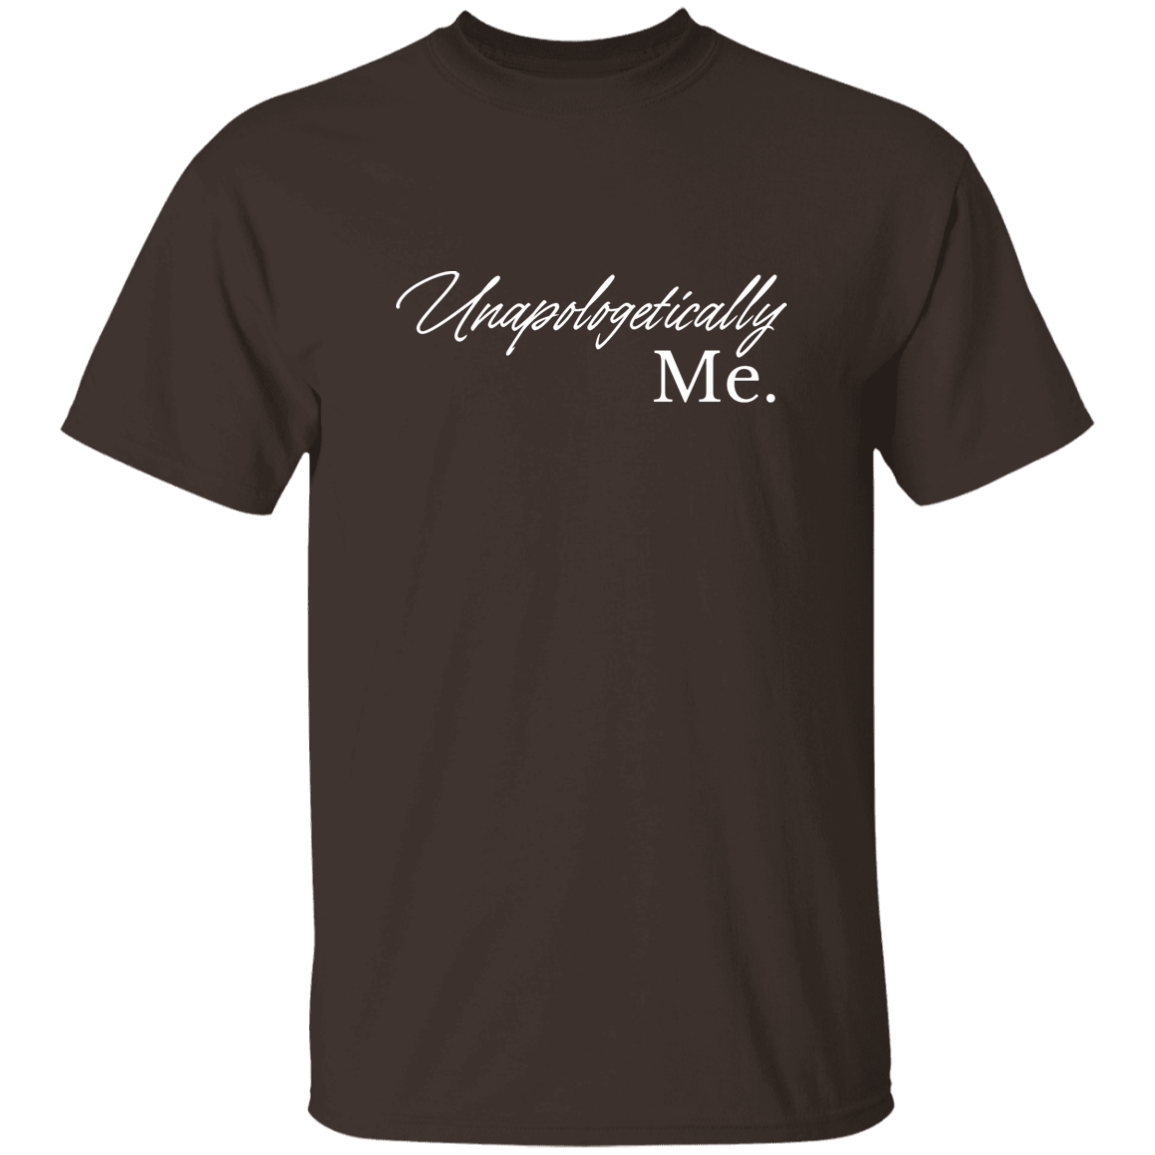 Unapologetically Me T-Shirt